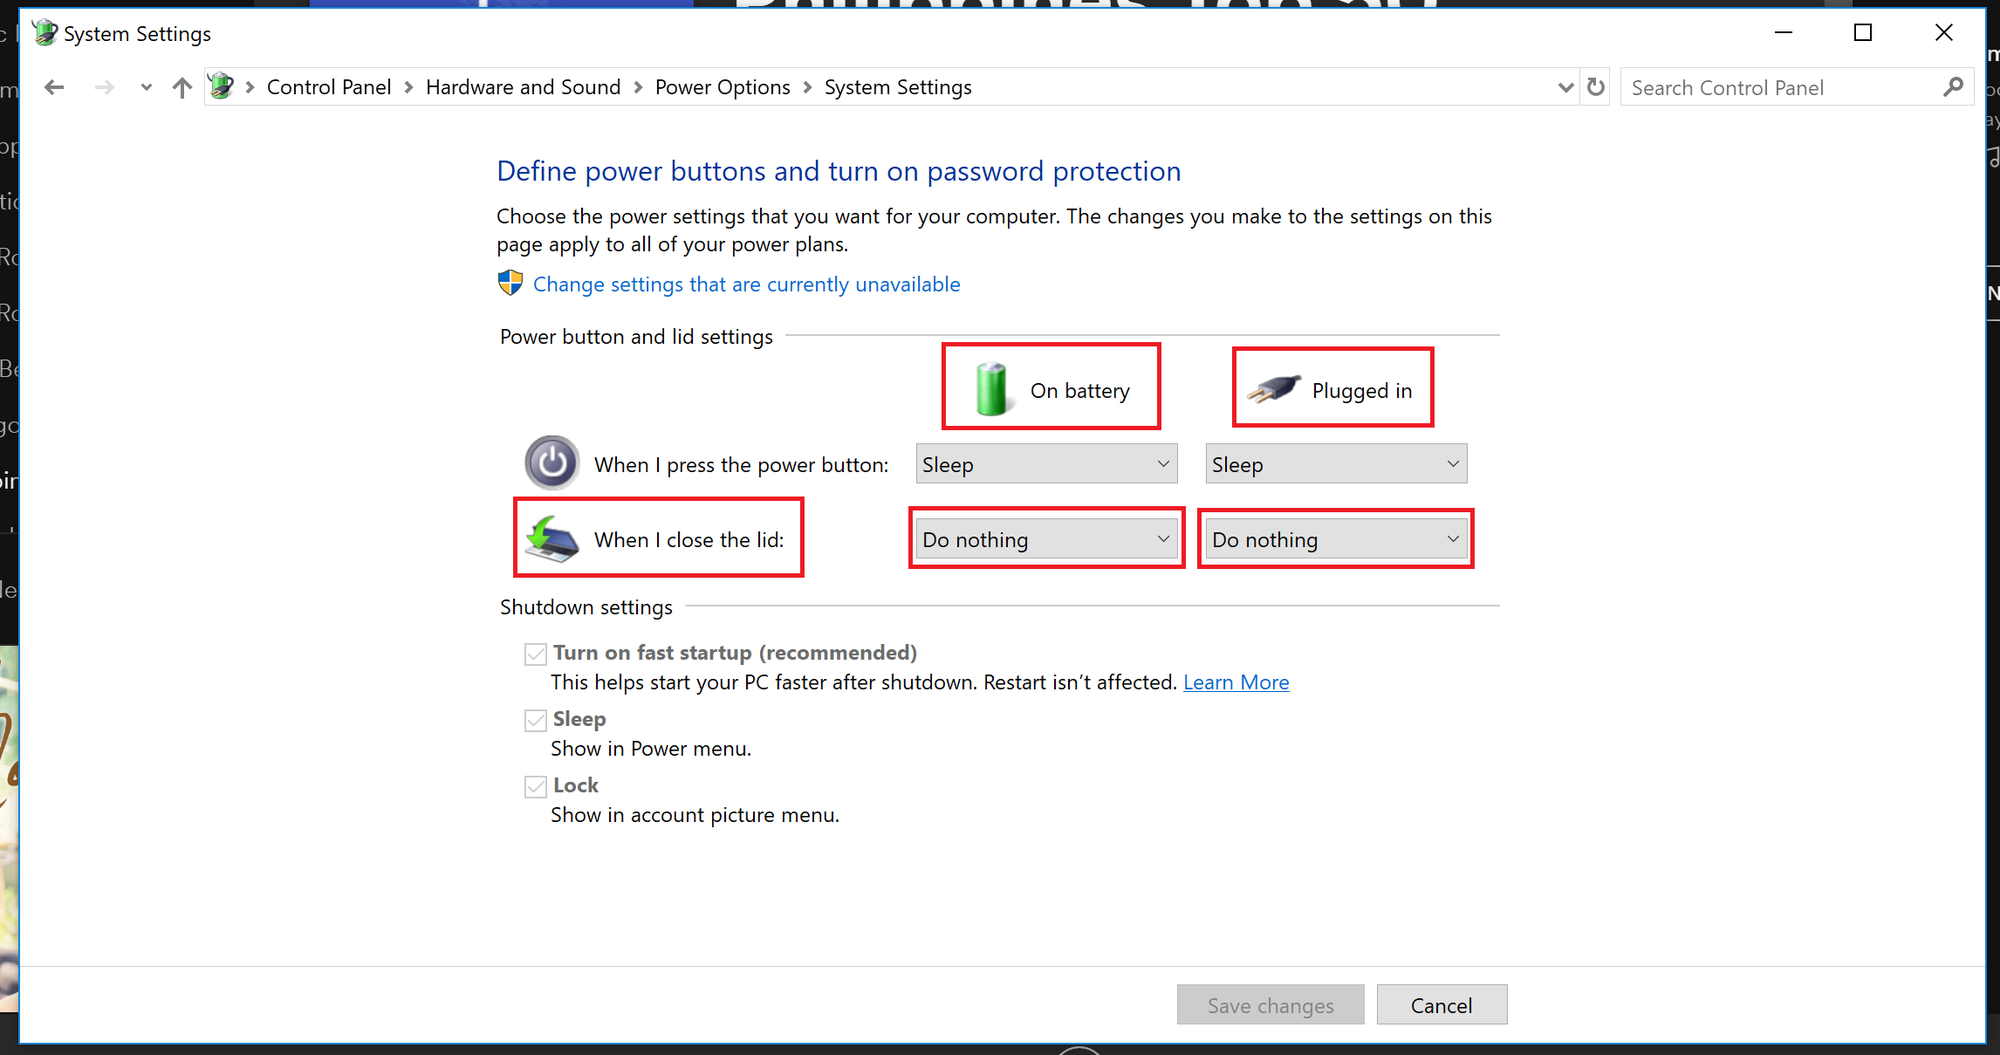 Windows 10 - Power Setting - Closing Lid / With Power Do Nothing - Doesn't work 3307afeb-cf65-4fdb-ab36-80e0cc60478e?upload=true.png